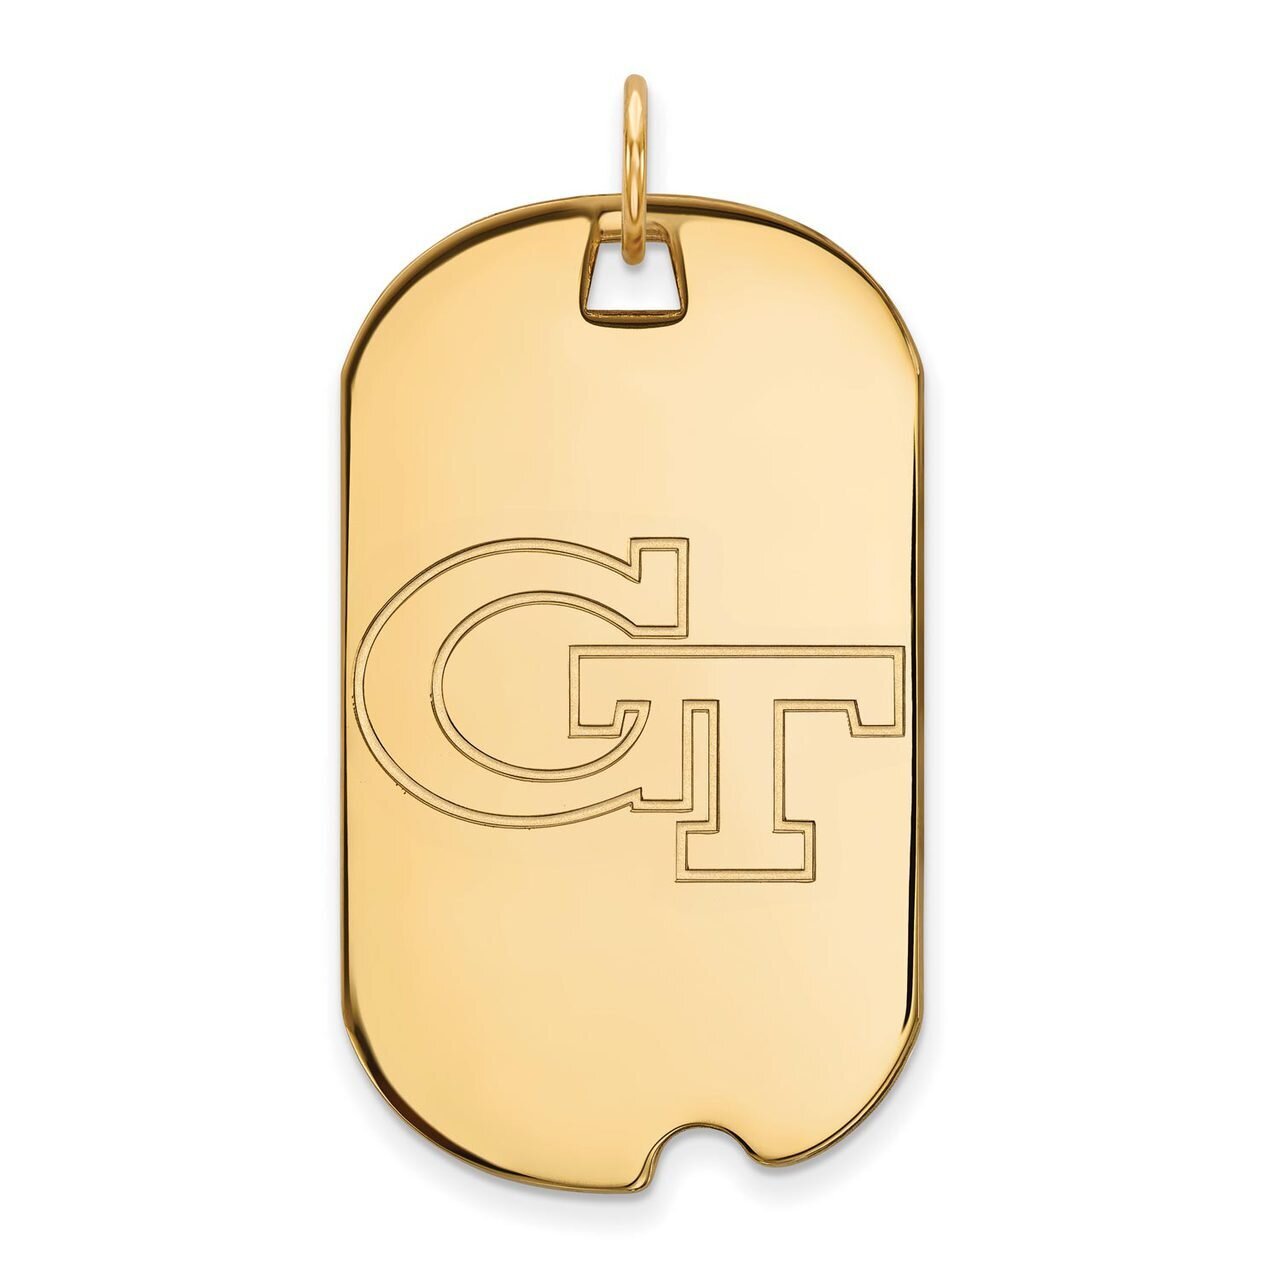 Georgia Institute of Technology Large Dog Tag 10k Yellow Gold 1Y022GT